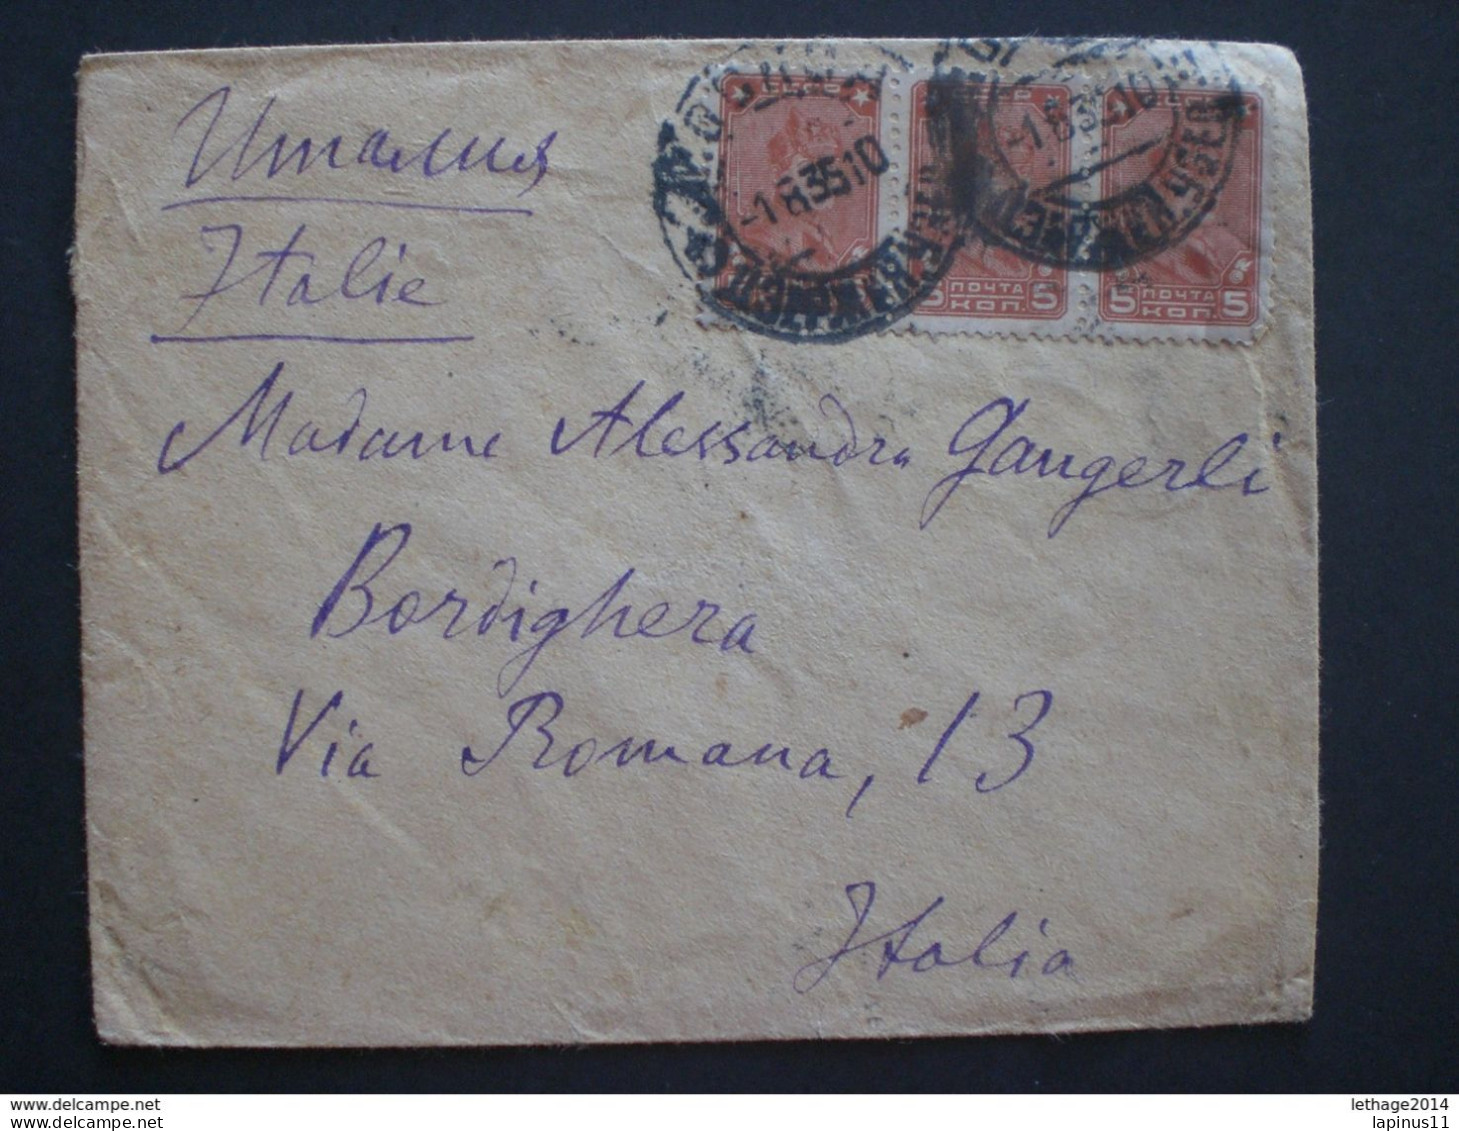 RUSSIA RUSSIE РОССИЯ STAMPS COVER 1935 Registered Mail RUSSIE TO ITALY RRR RIF.TAGG. (11) - Covers & Documents